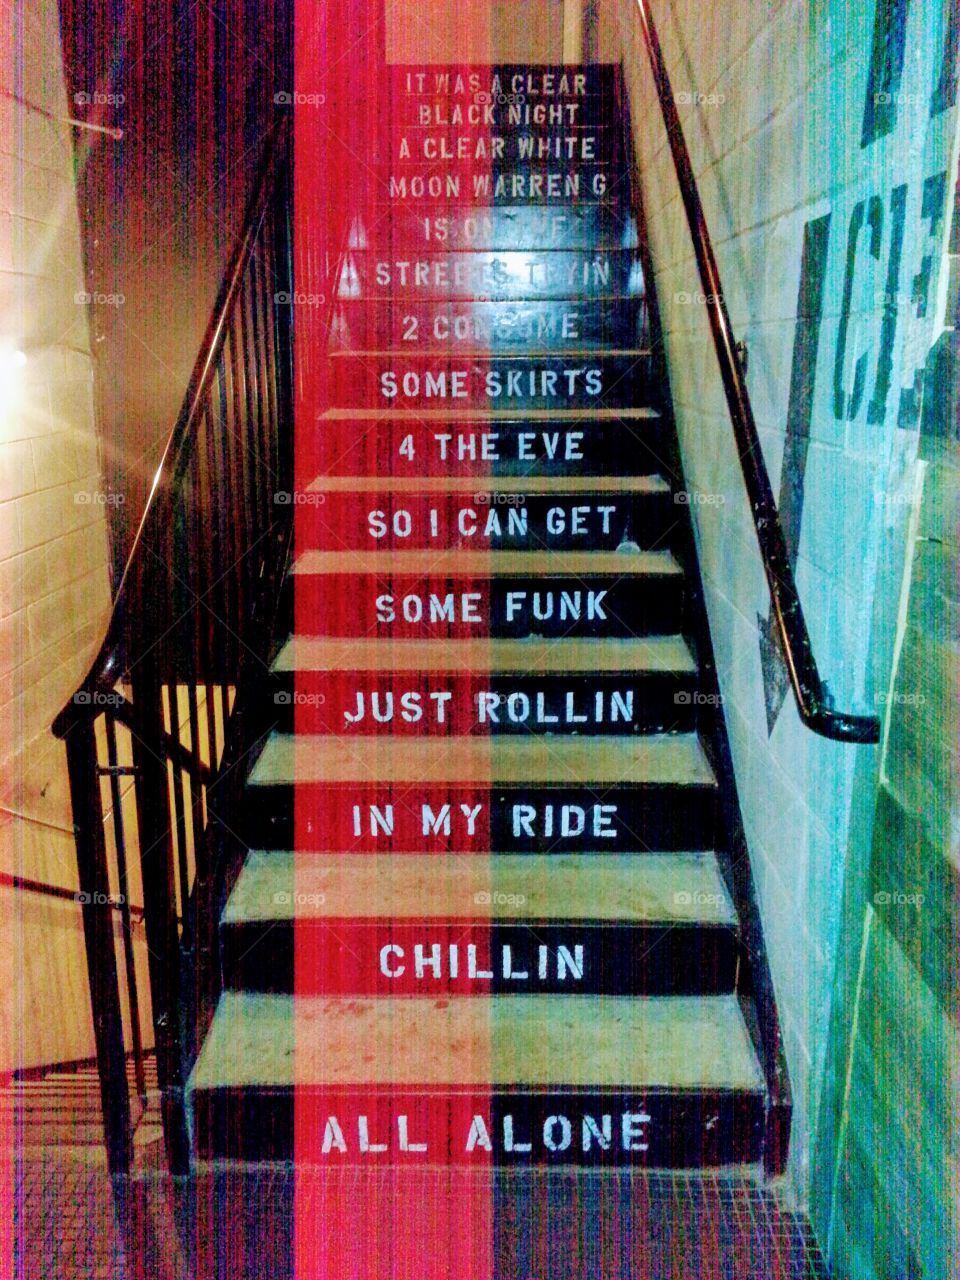 Stairs with Warren G "Regulate" lyrics on stairs at Punch Bowl Social in Schaumburg, Illinois